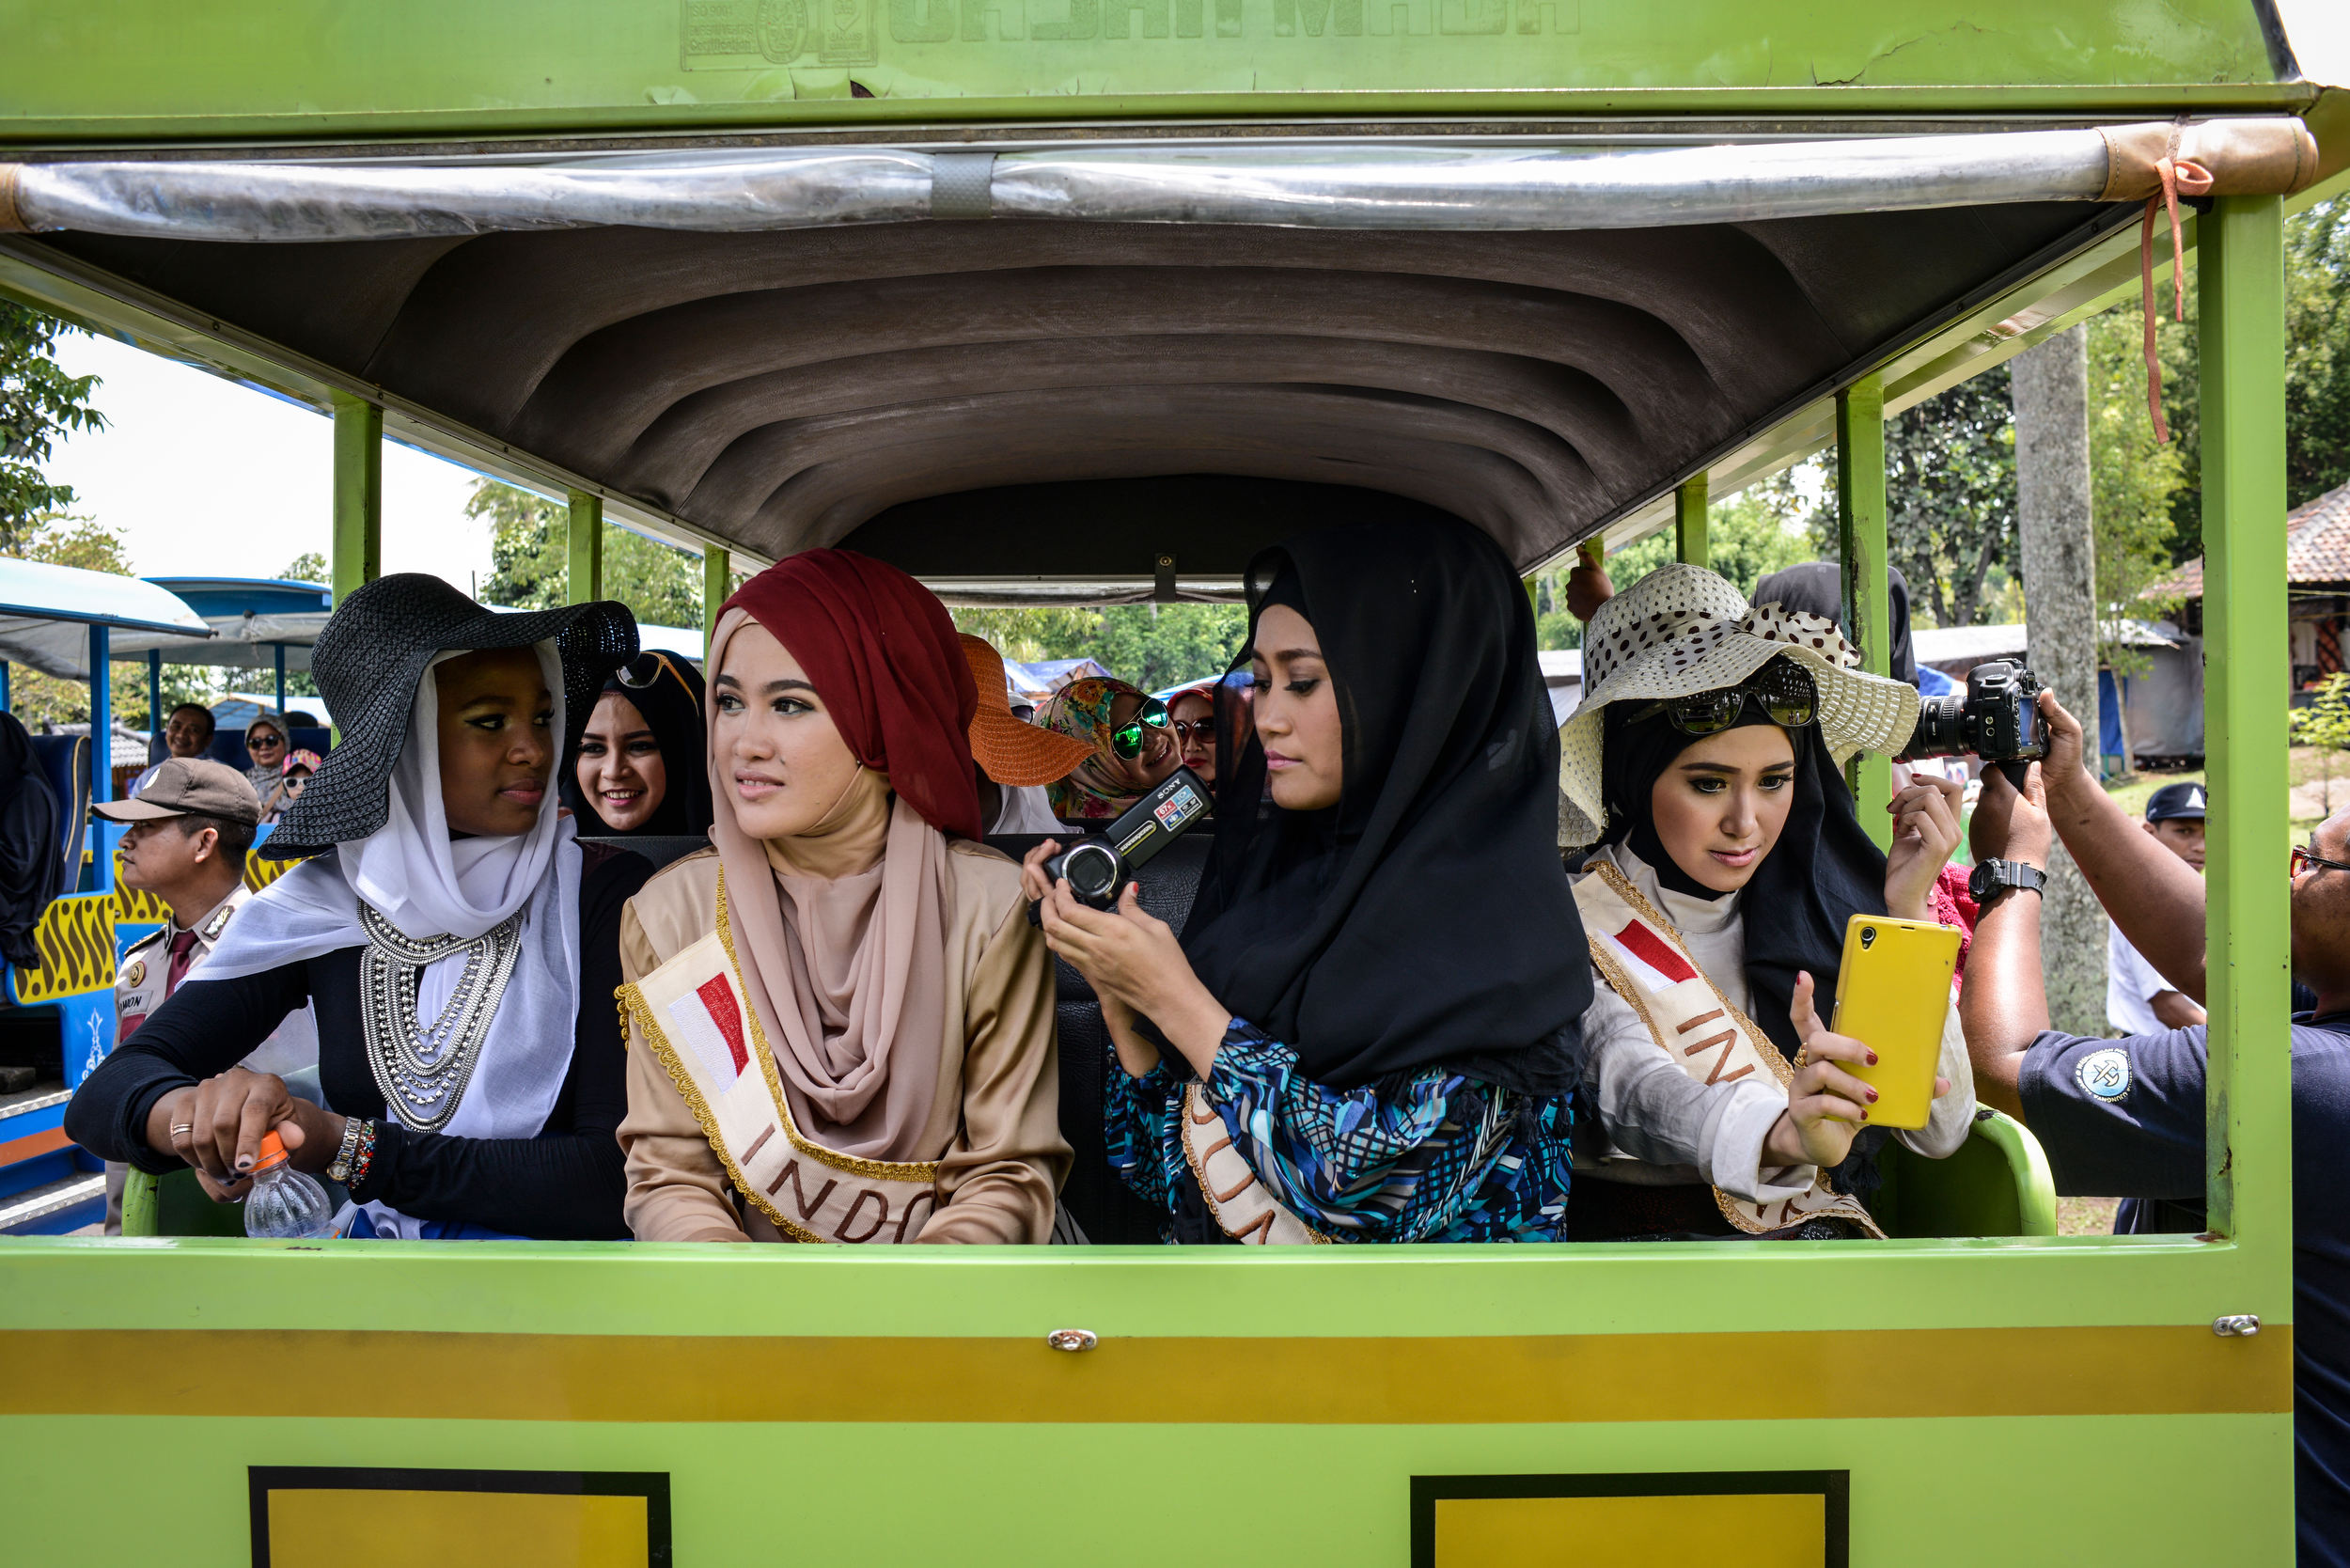  The Miss Muslimah finalists visit Borobudur,  a 9th-century Mahayana Buddhist Temple outside of Yogyakarta, Indonesia.   Miss Muslimah 2014 an award competition in Indonesia, which intends to be the opposite of a beauty pageant. 